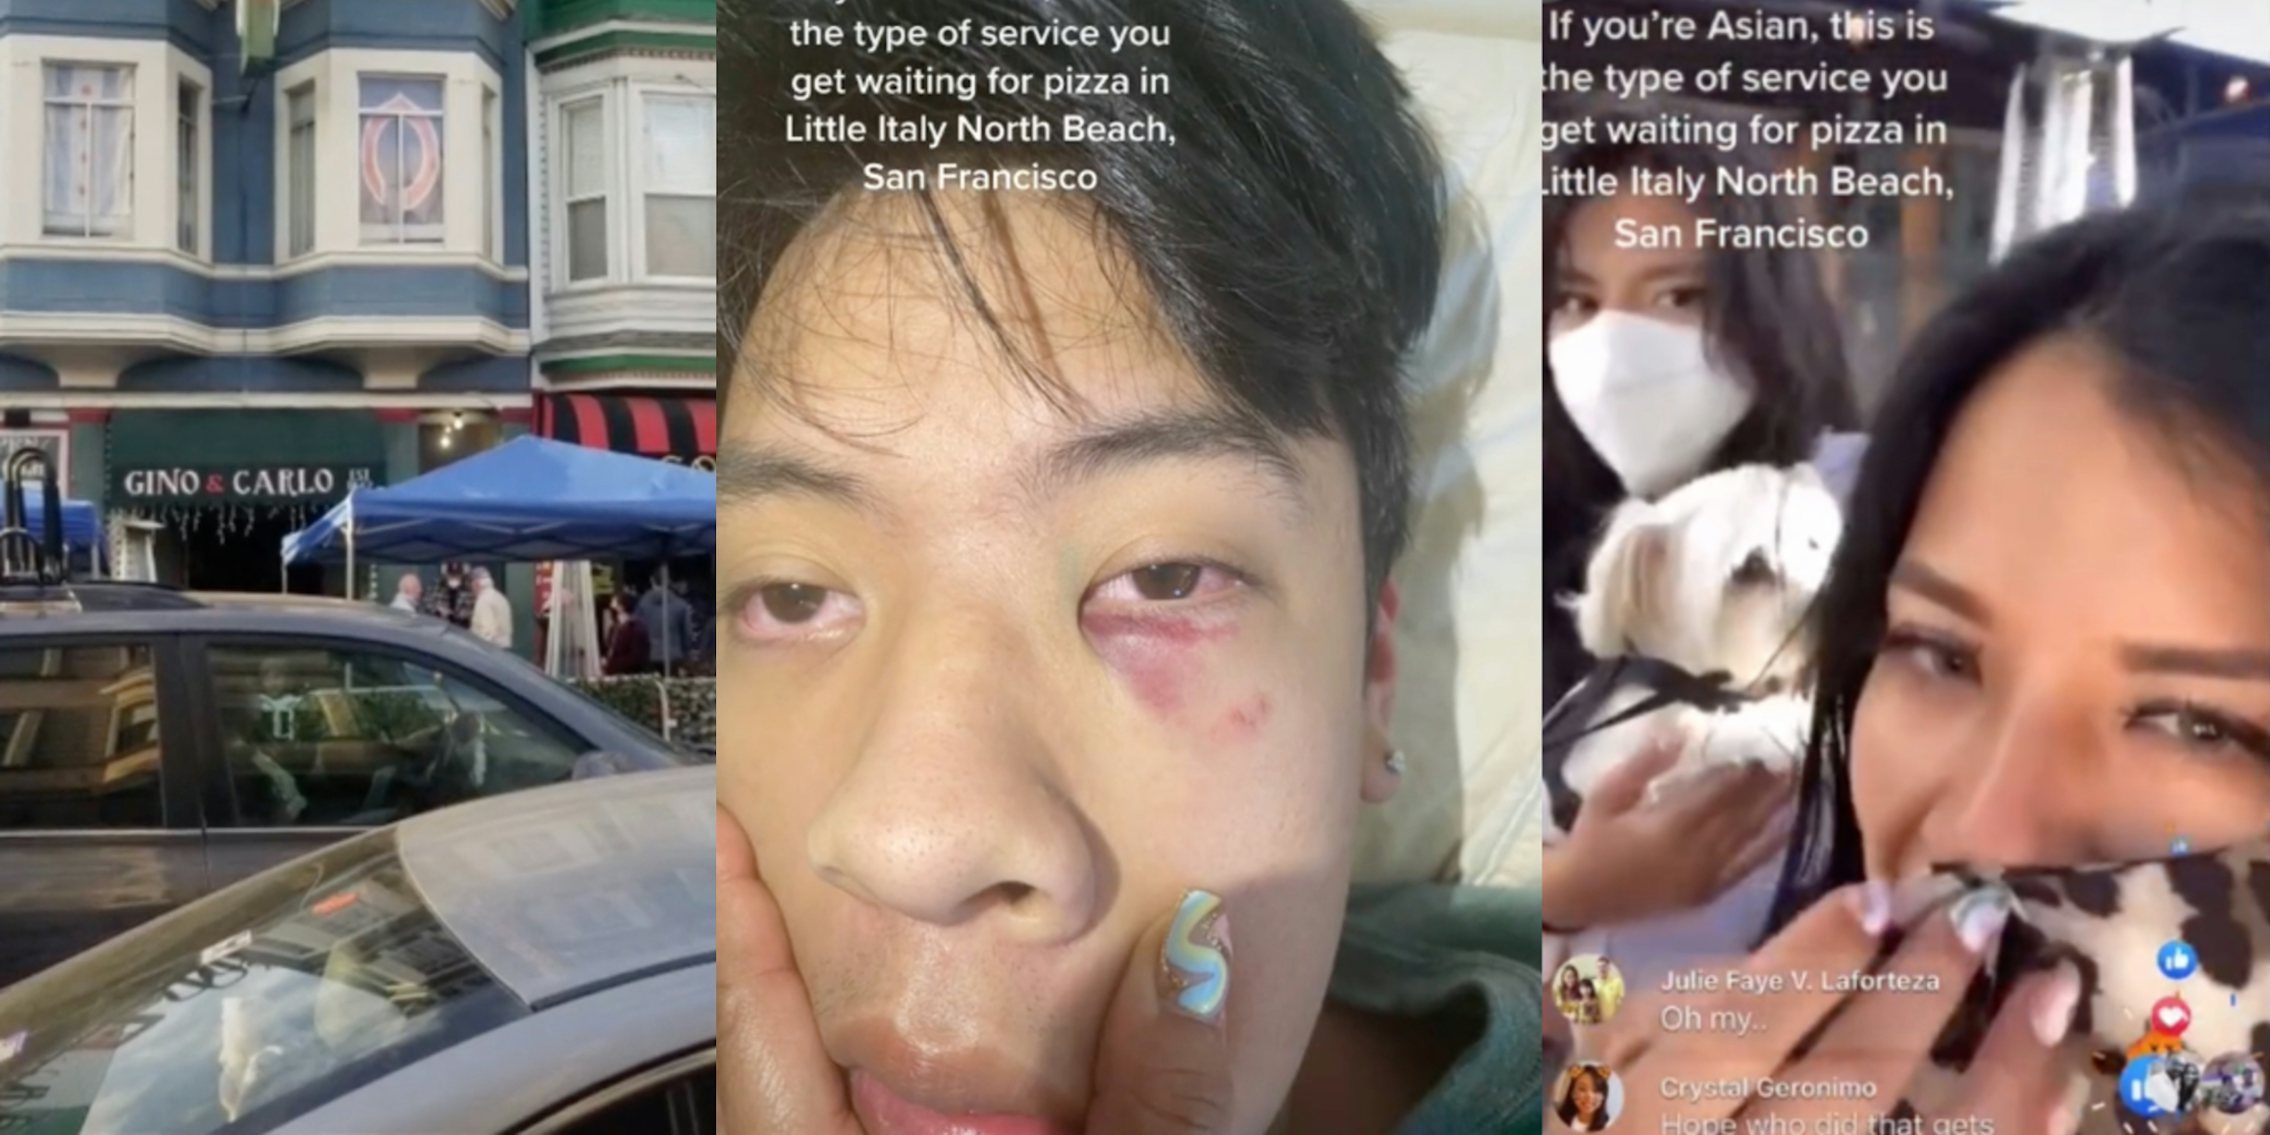 outside of gino and carlo, Asian 18-year-old with swollen and bruised eye, and Sofia Enguillado's Facebook live